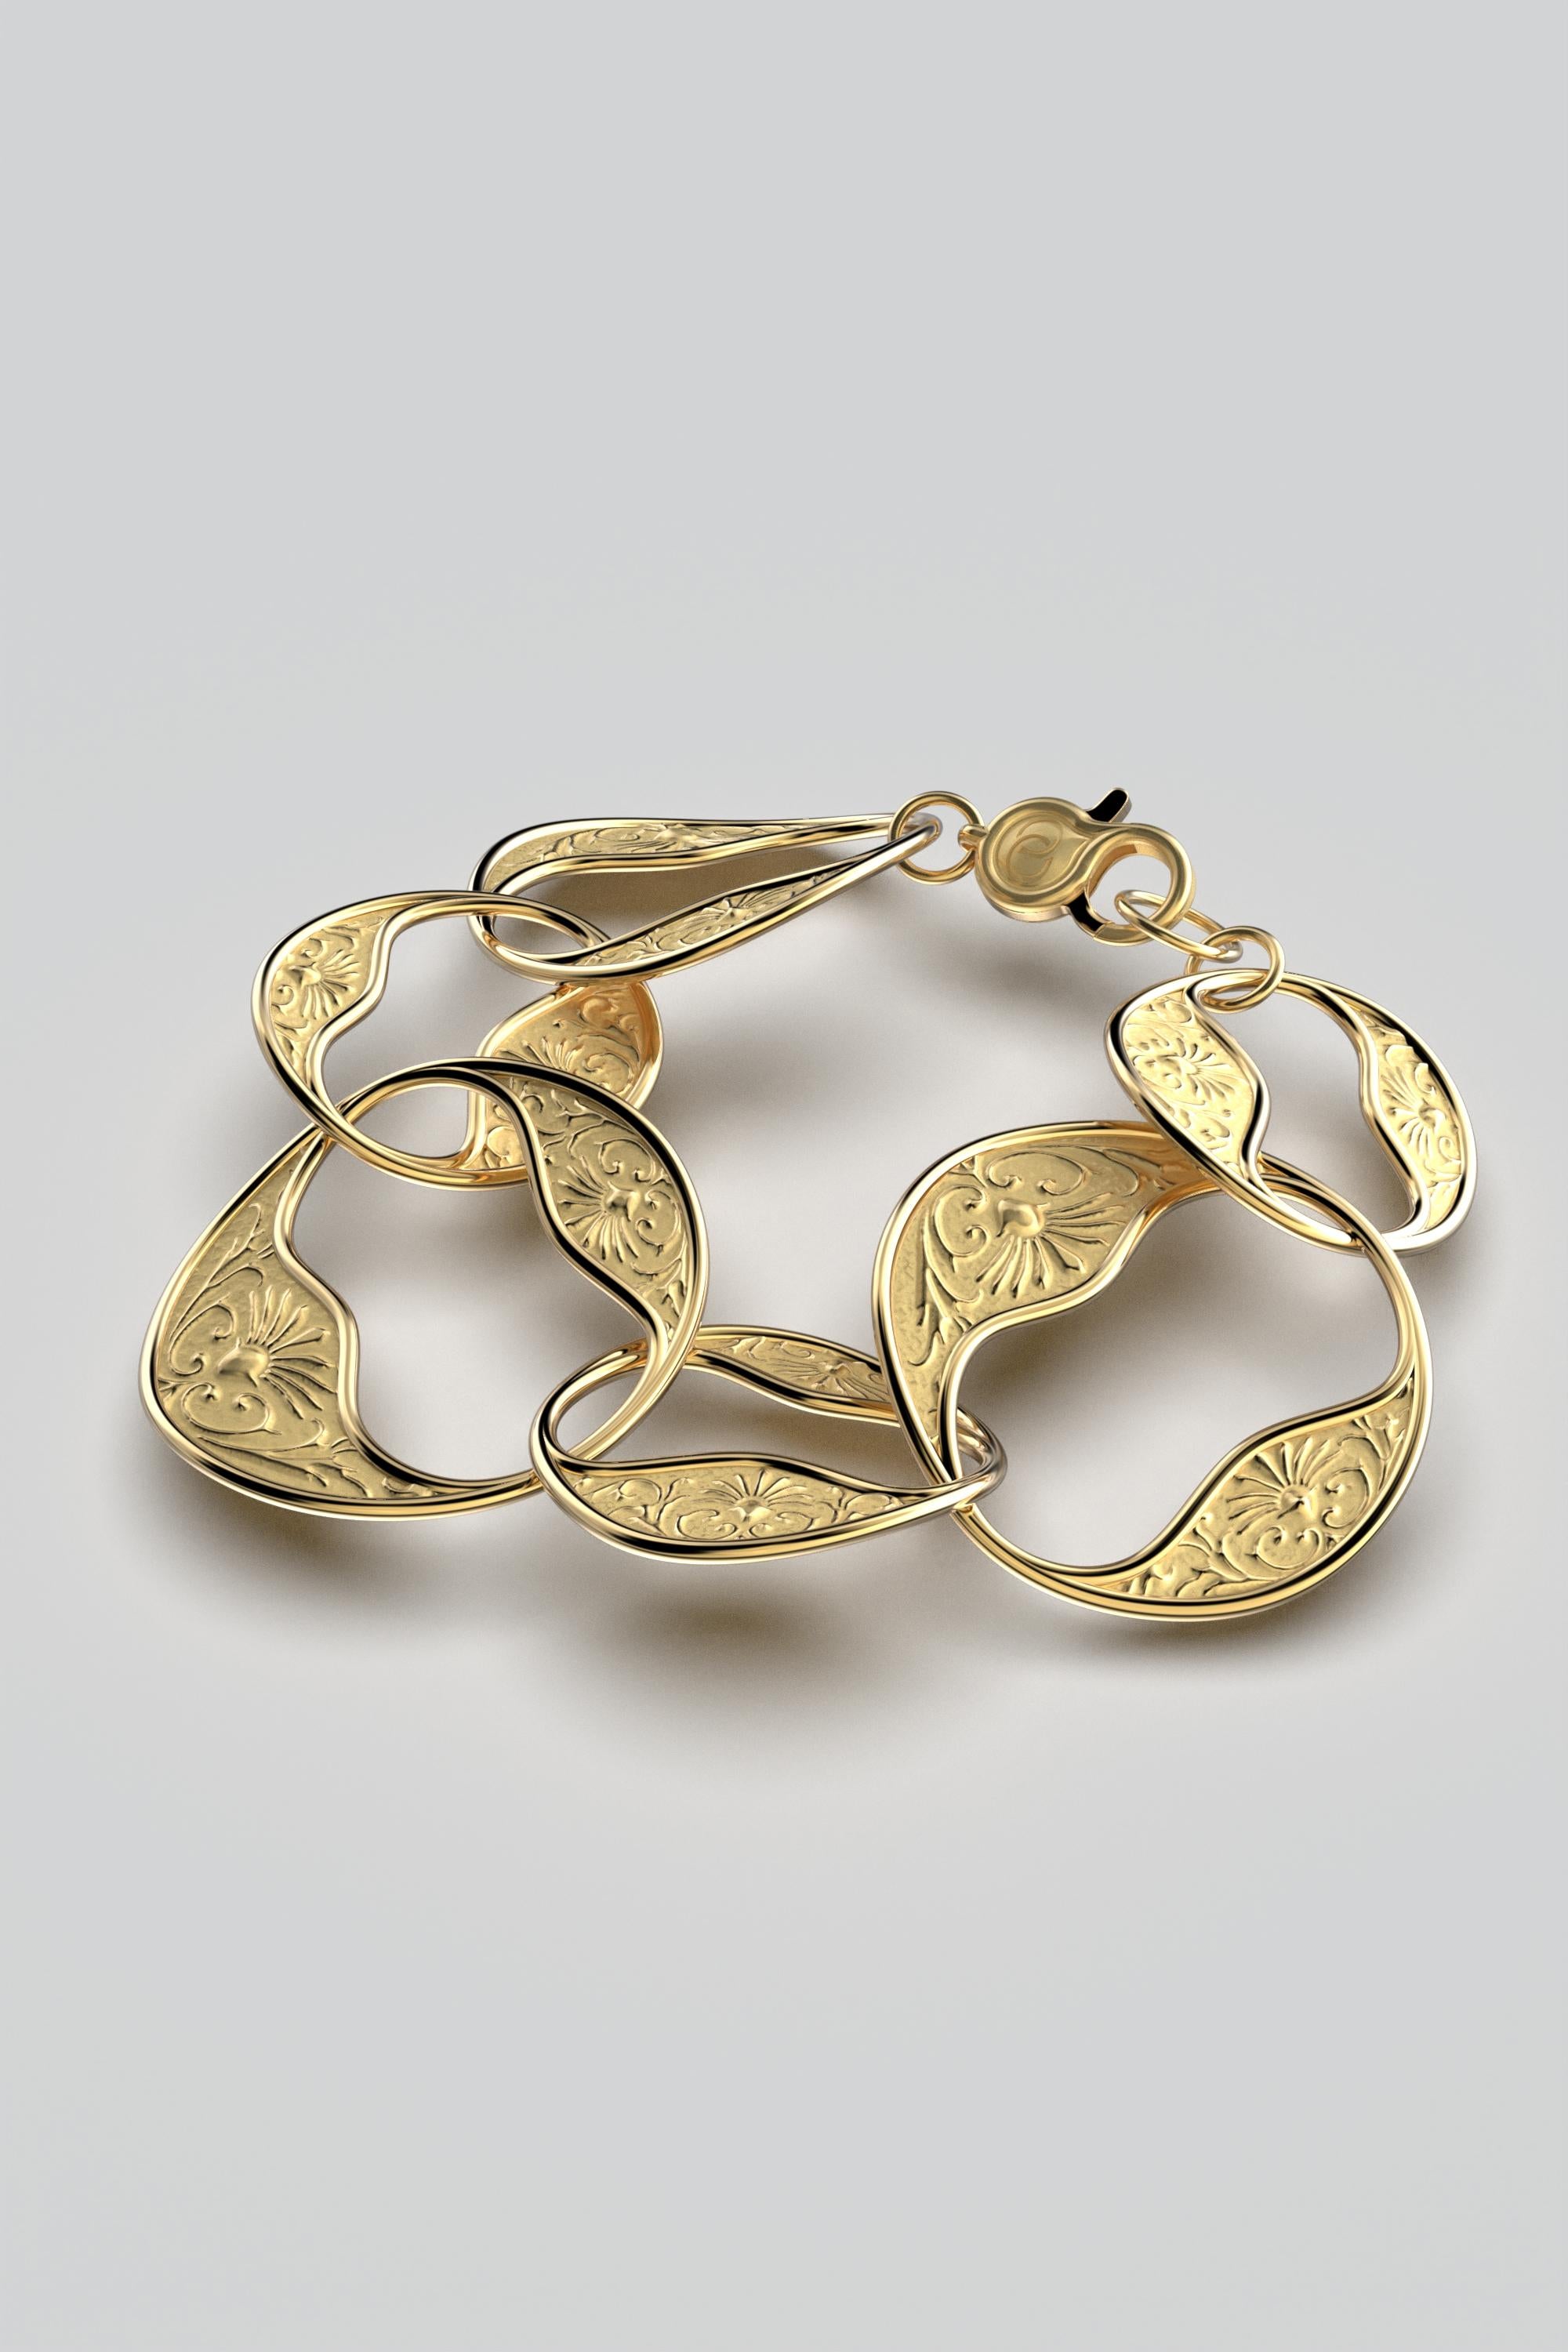 Made to order Italian Jewelry.
Opulent 18k Gold Baroque Bracelet, Made in Italy – Choose Yellow, White, or Rose Gold. 7.28